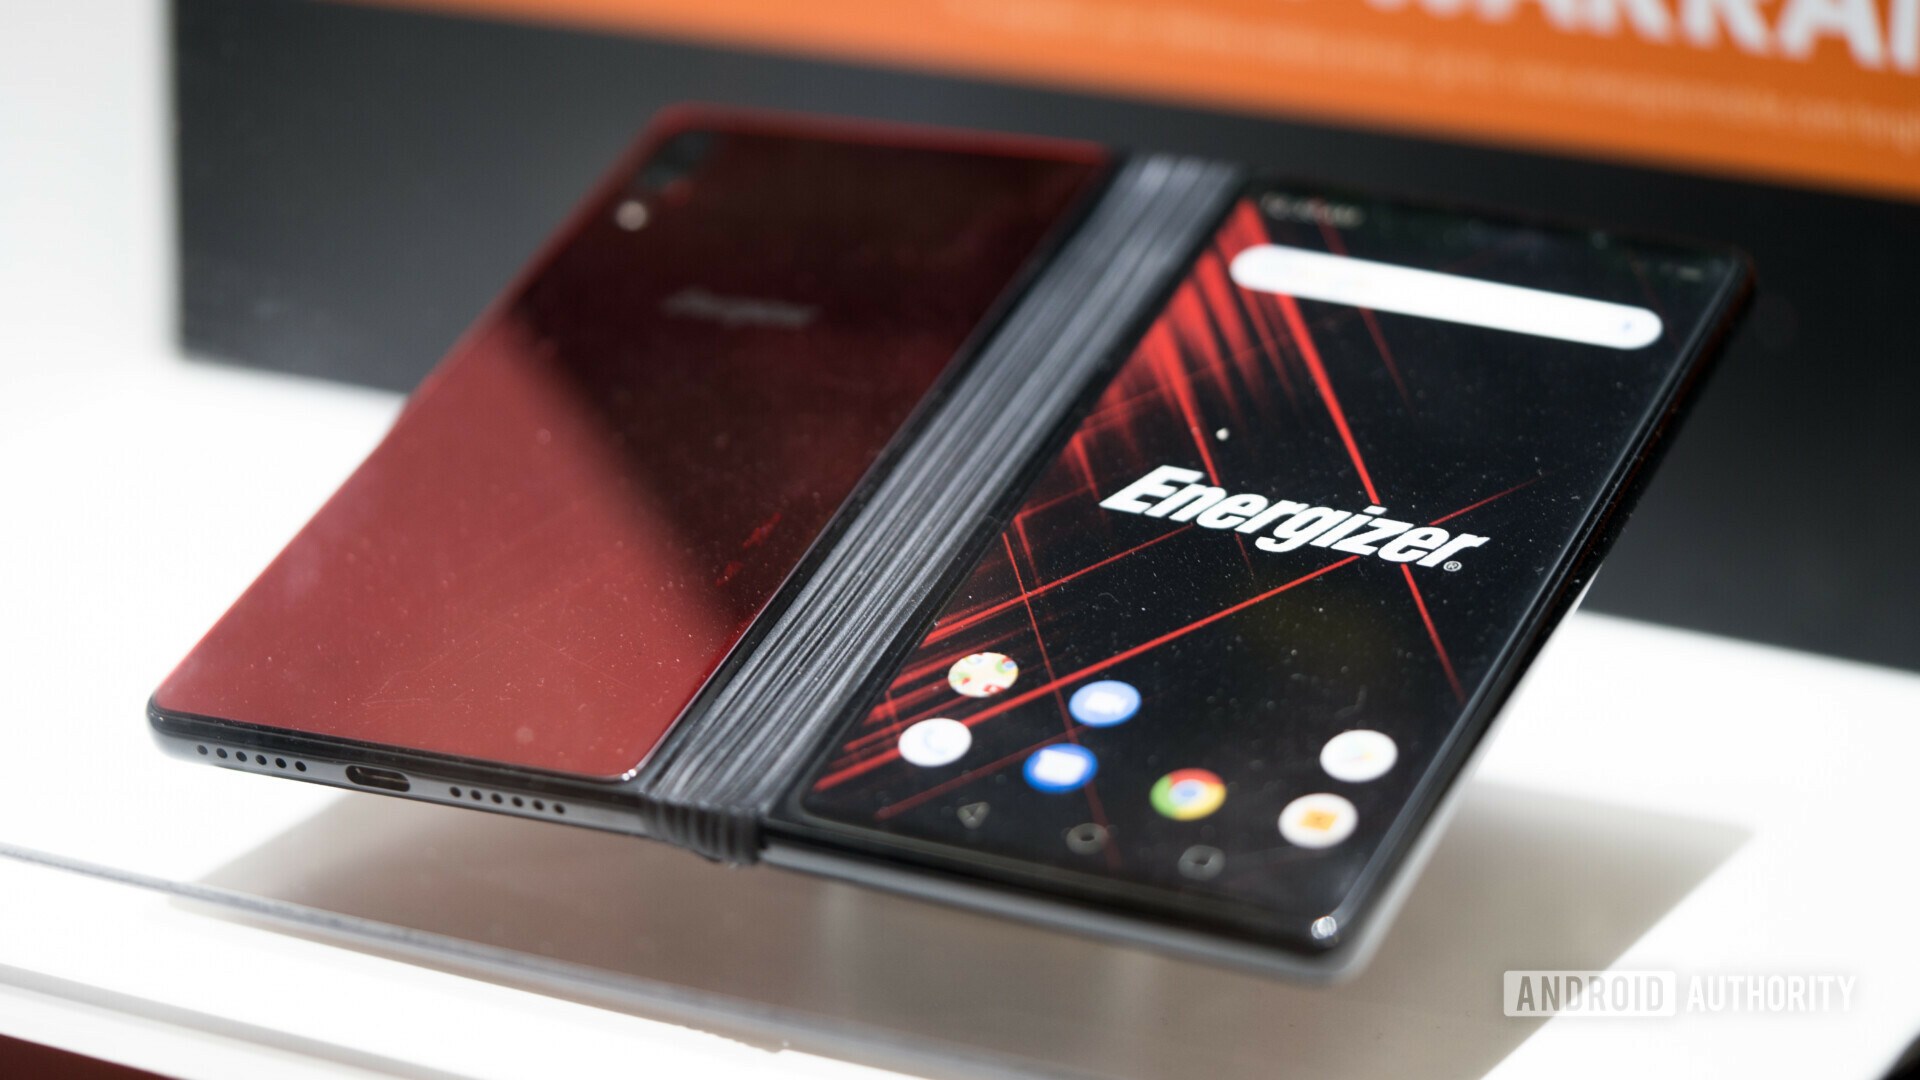 Energizer Power Max P8100S first look mwc 2019 2 1